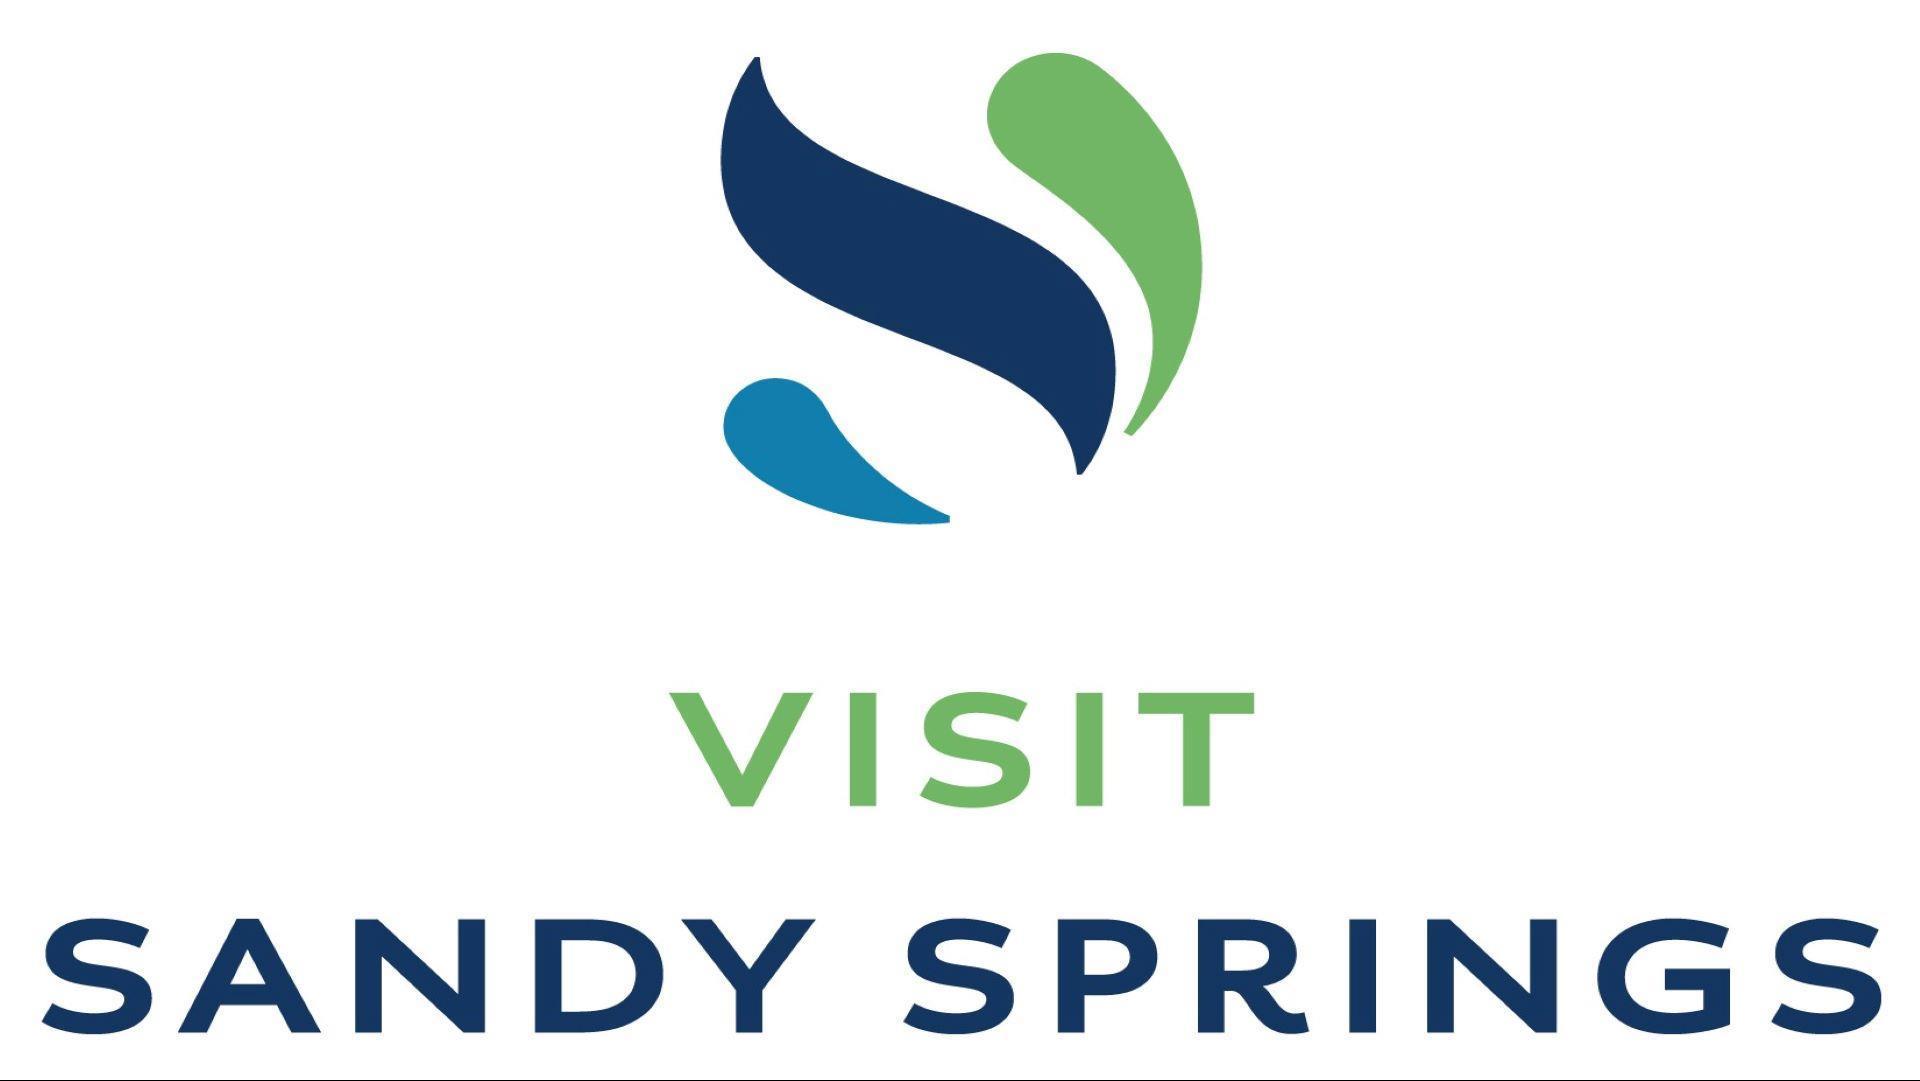 Sandy Springs Hospitality and Tourism in Sandy Springs, GA